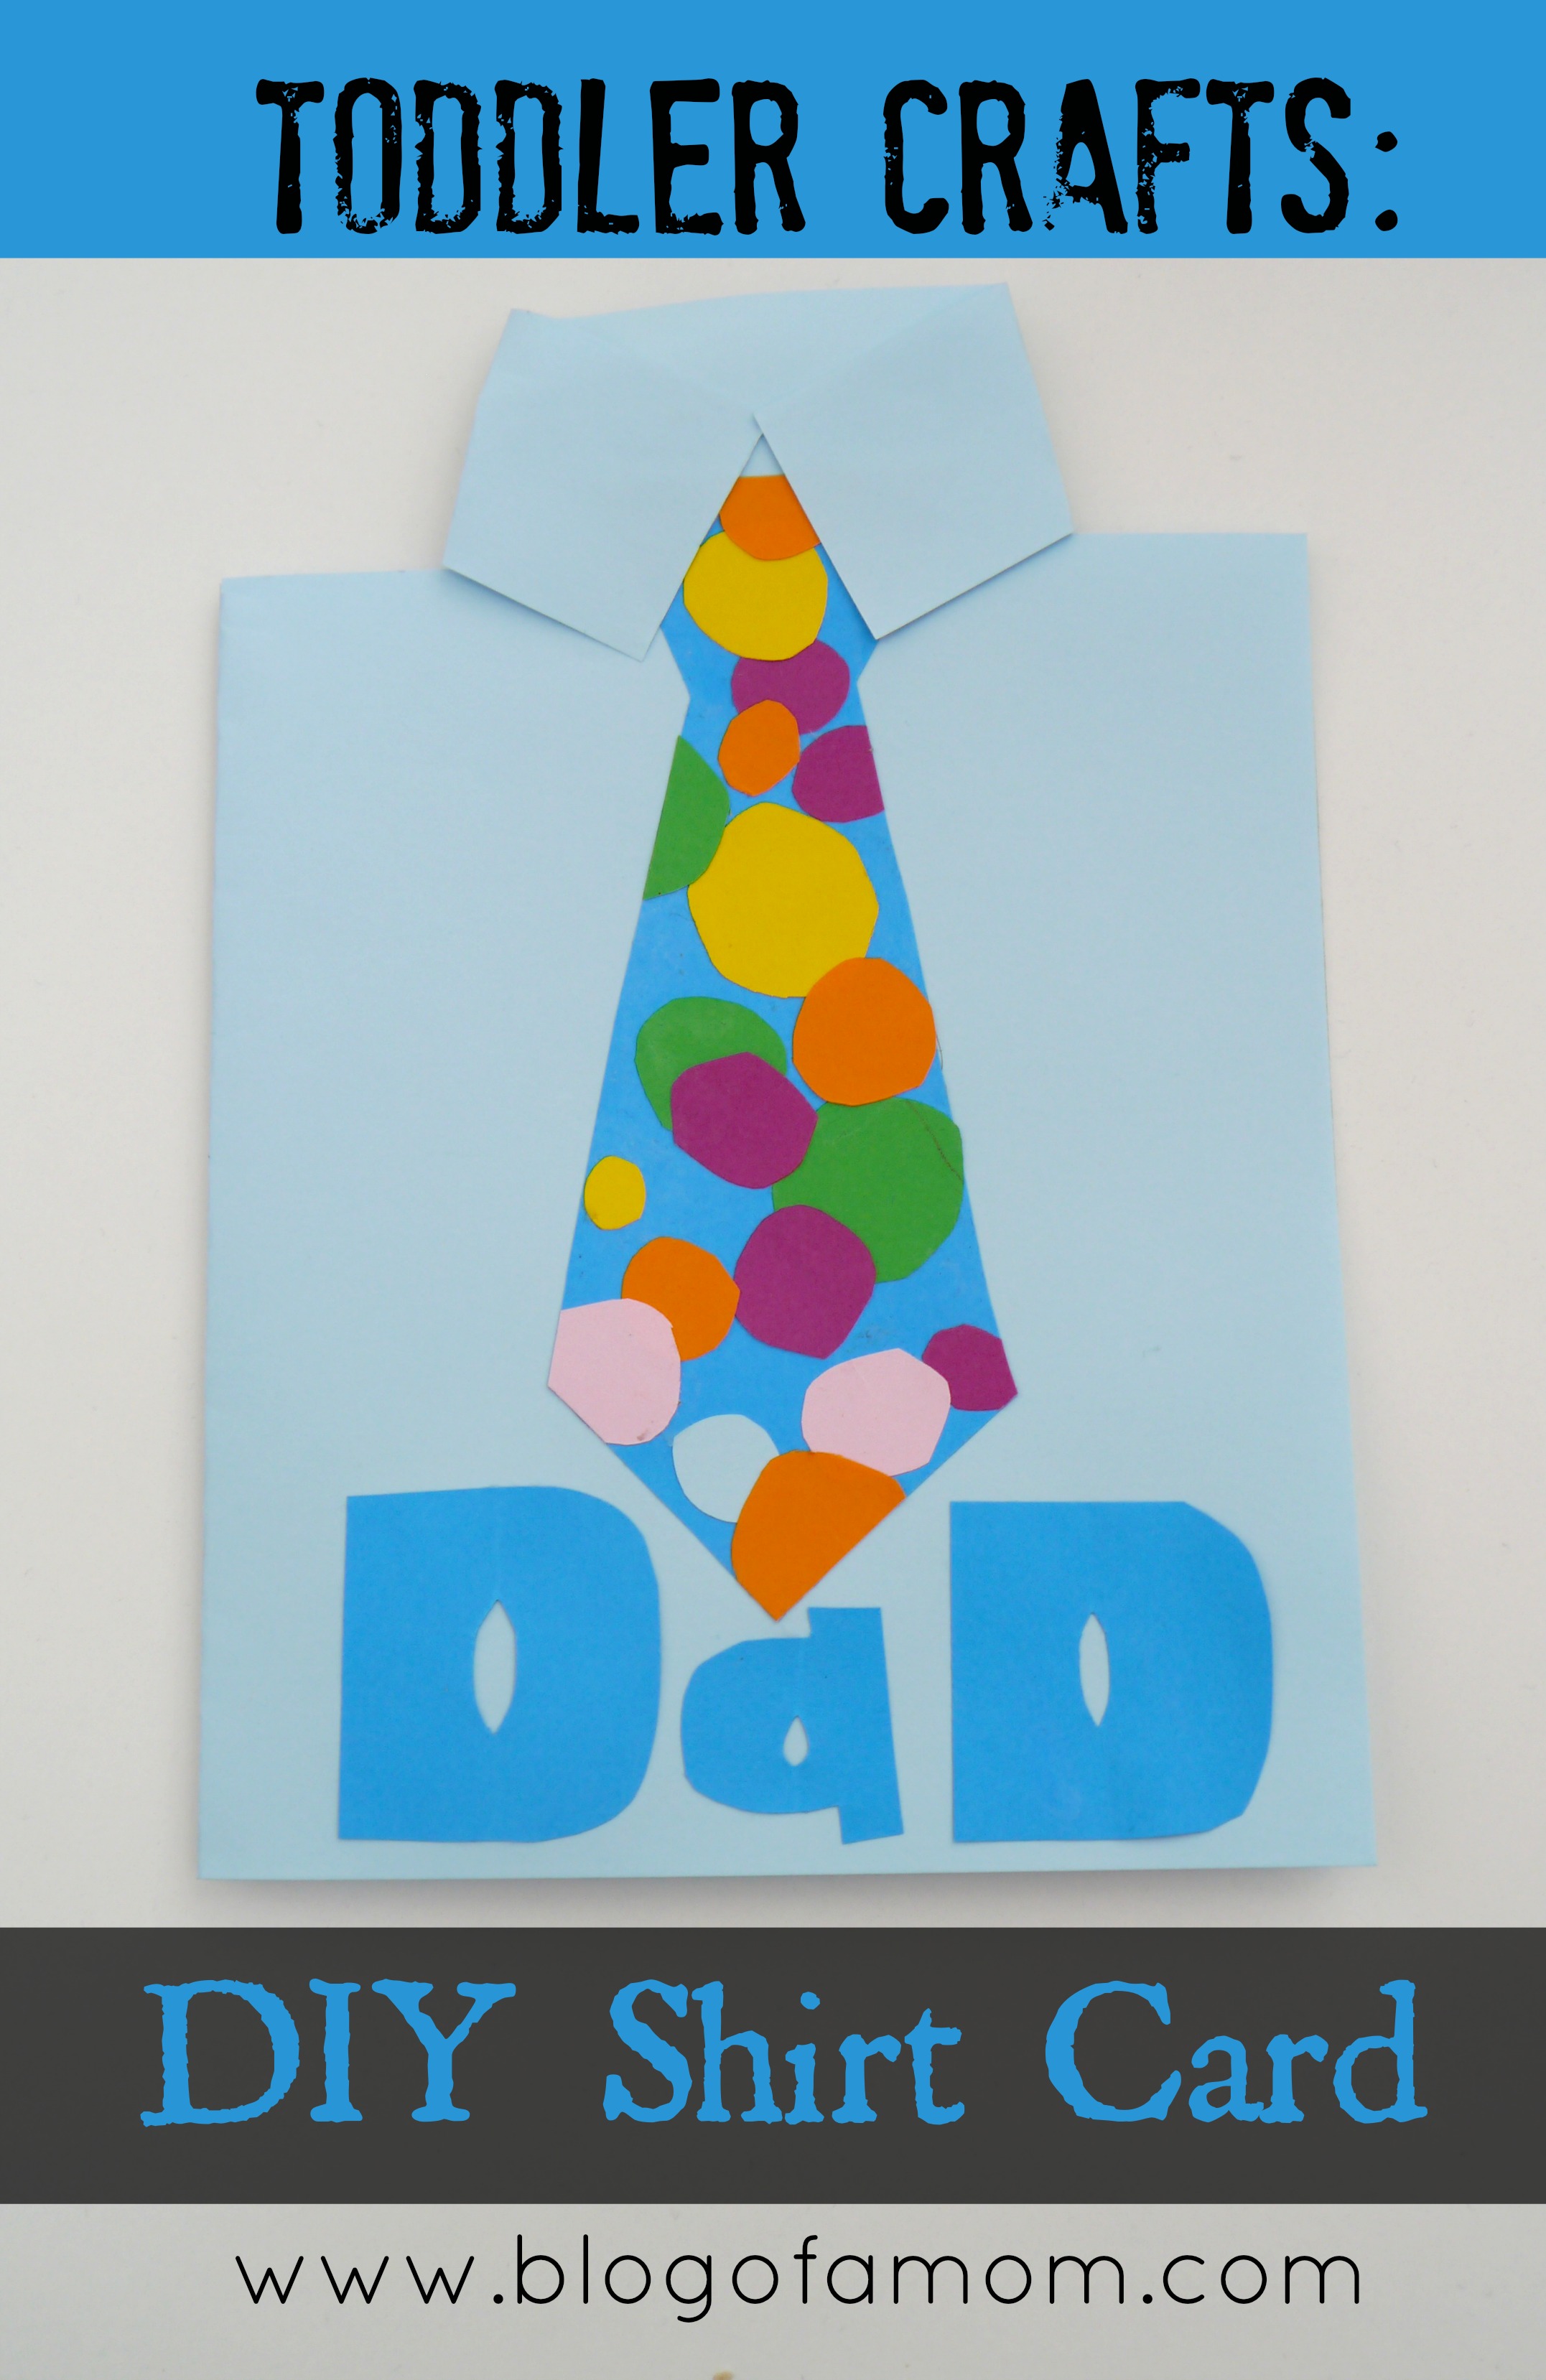 DIY Father's Day Cards Videos - Get Creative!